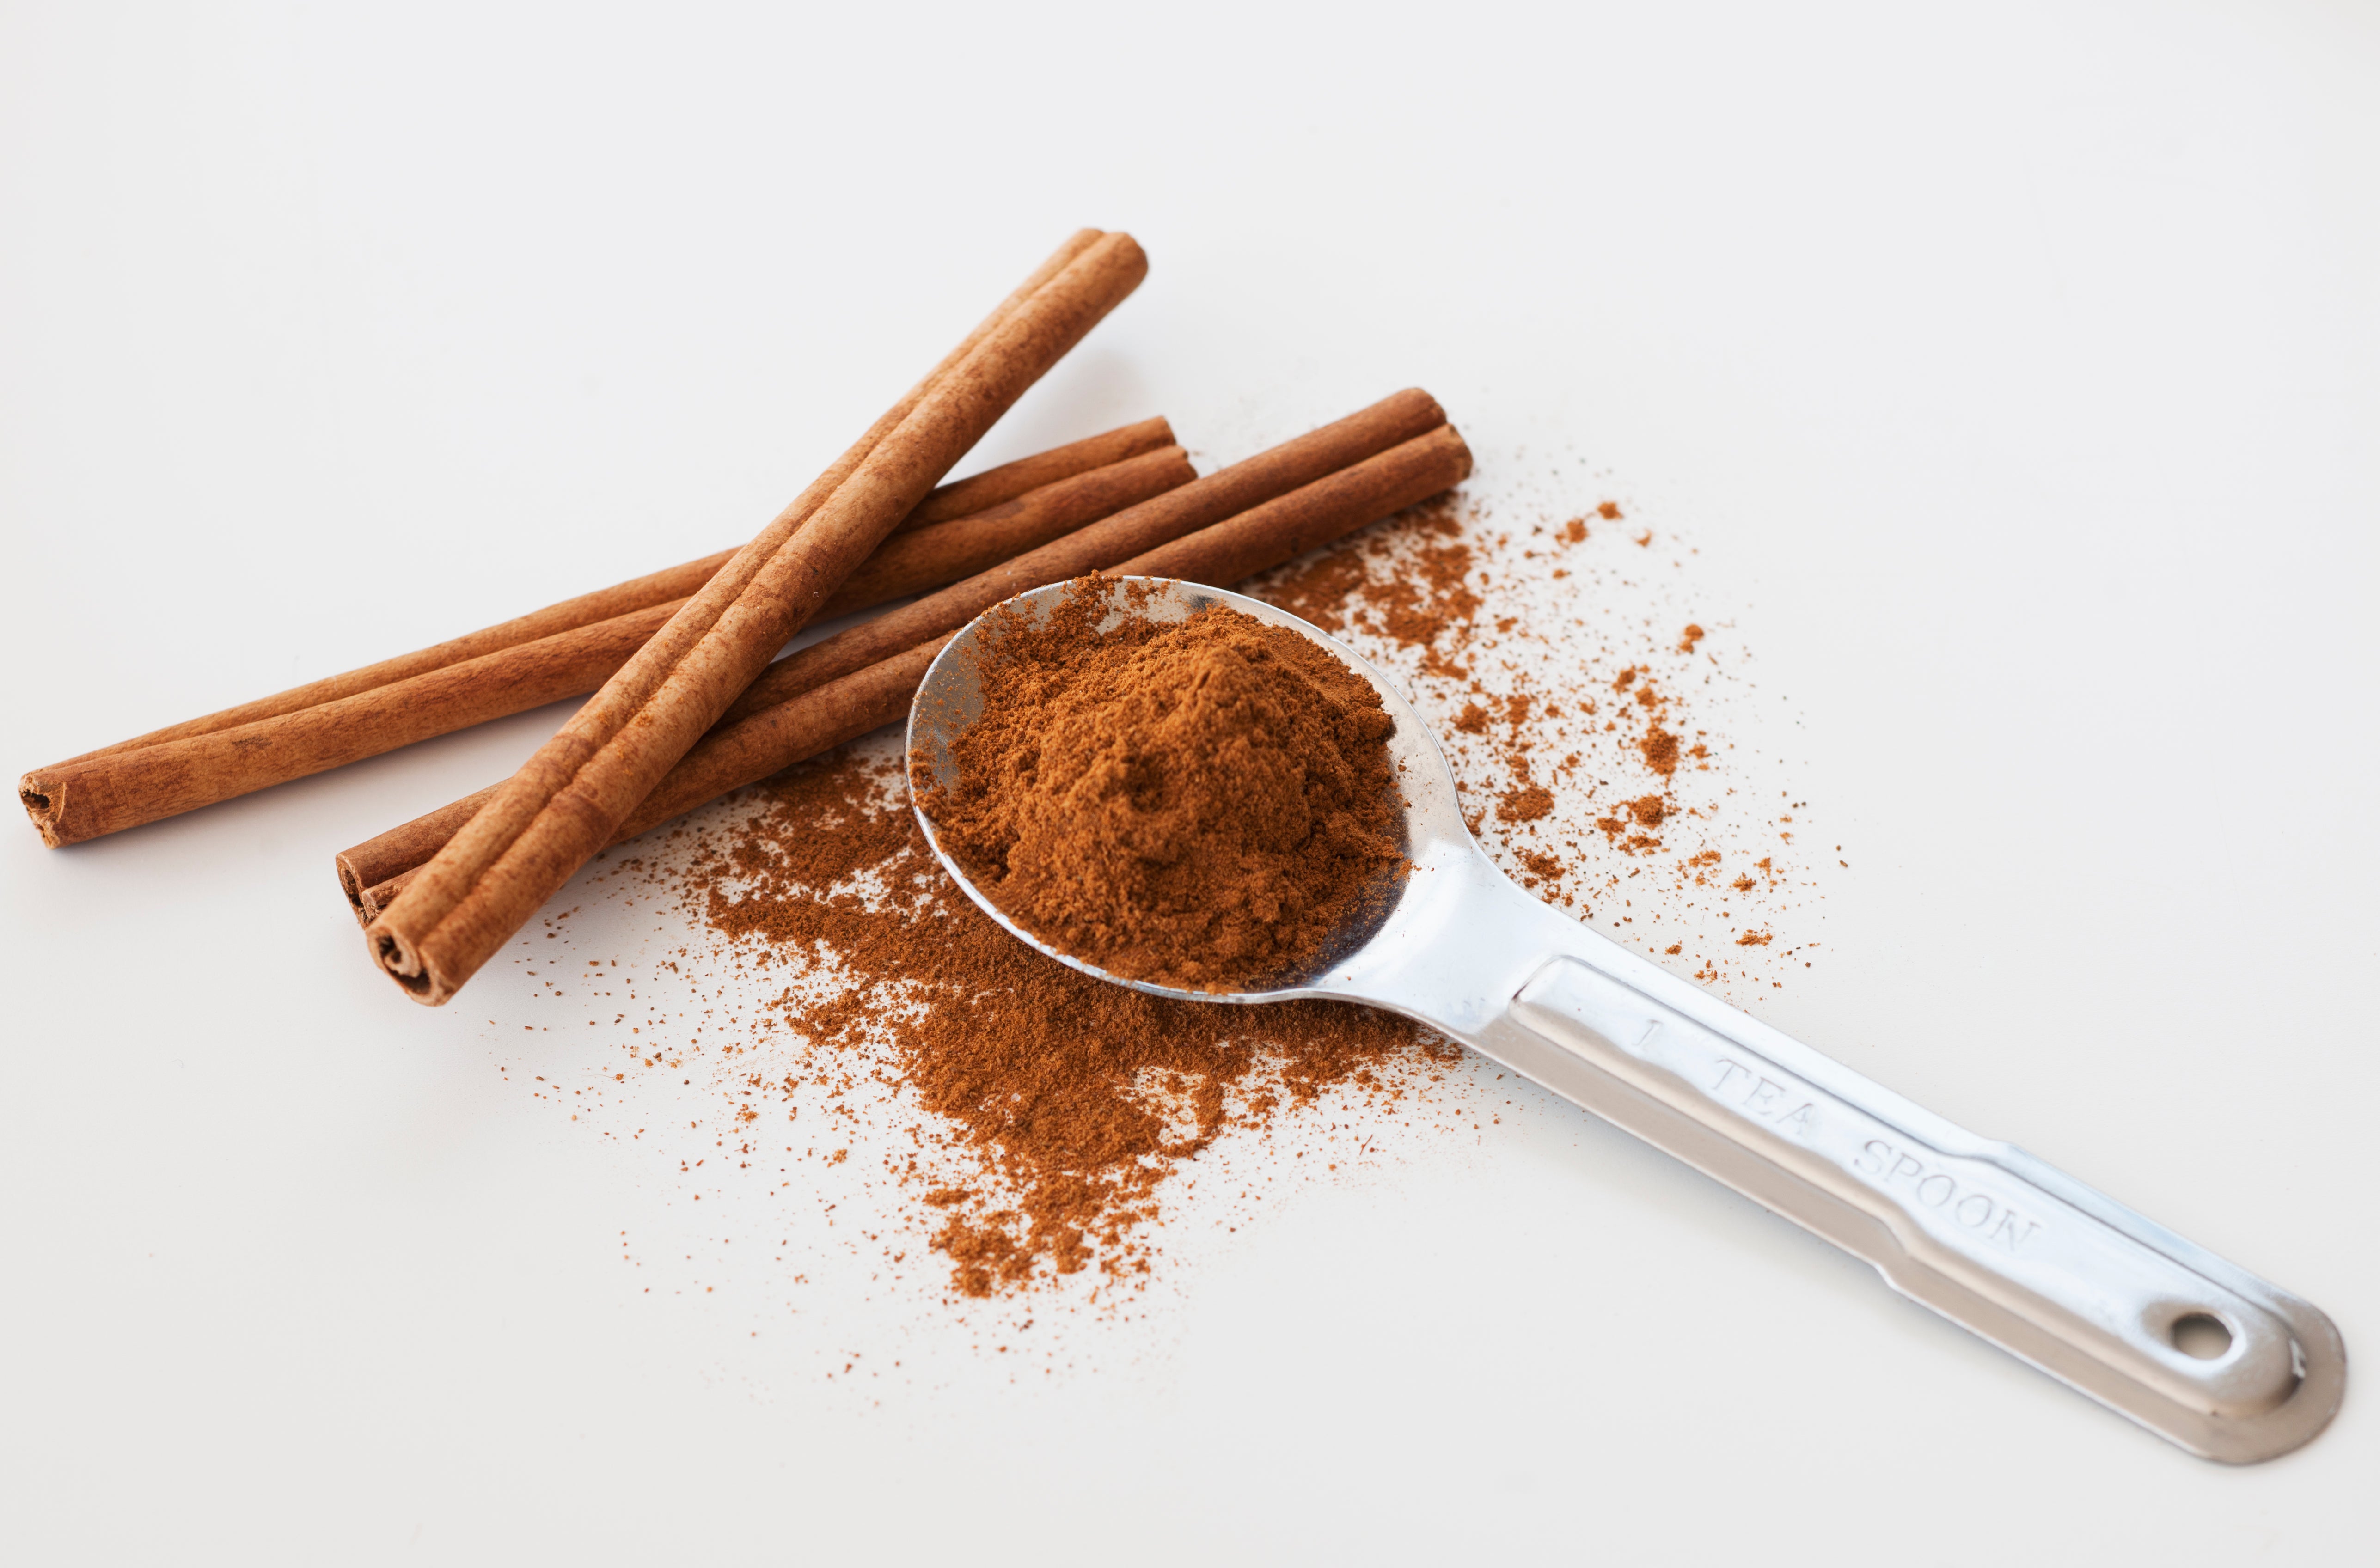 11 Herbs and Spices You Need To Incorporate Into Your Beauty Routine Now
